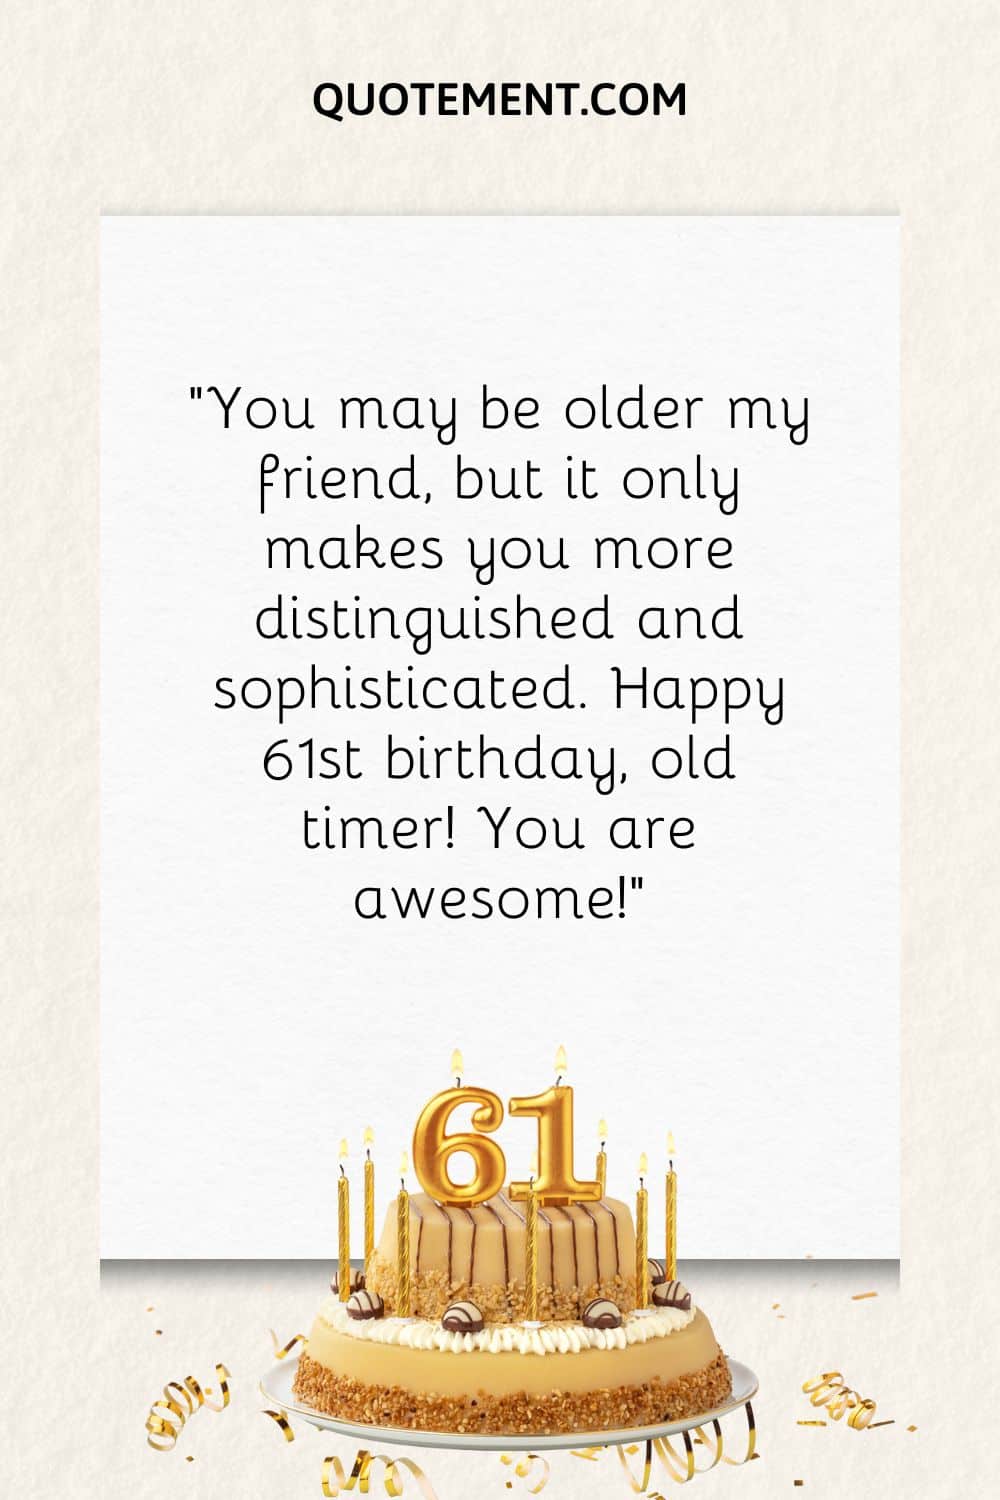 “You may be older my friend, but it only makes you more distinguished and sophisticated. Happy 61st birthday, old timer! You are awesome!”